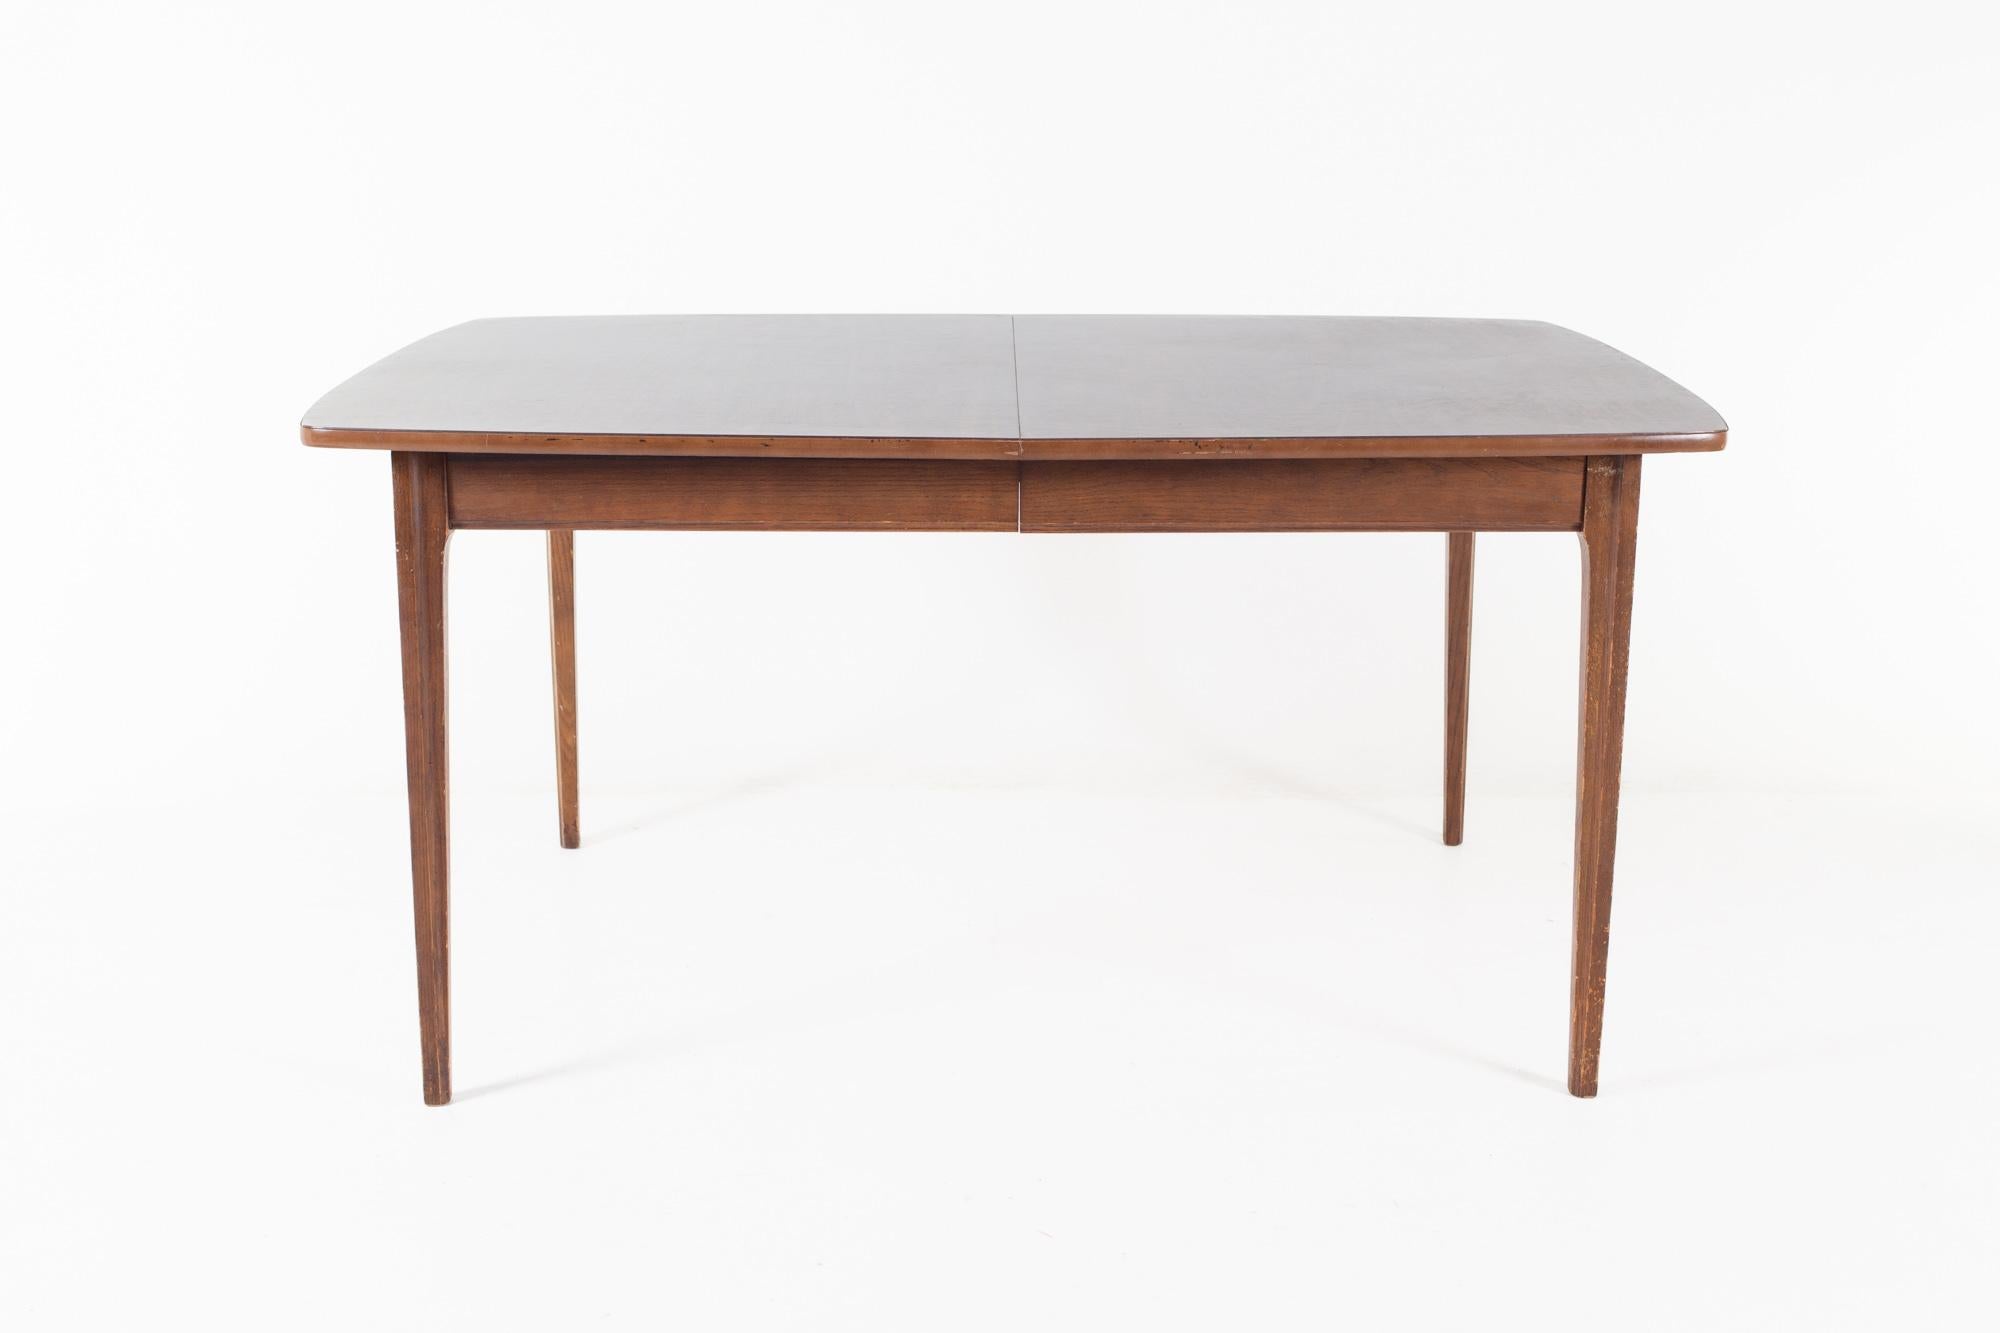 Lane style mid century laminate top dining table

The table measures: 60 wide x 40 deep x 29 high, with a chair clearance of 25 inches 

All pieces of furniture can be had in what we call restored vintage condition. That means the piece is